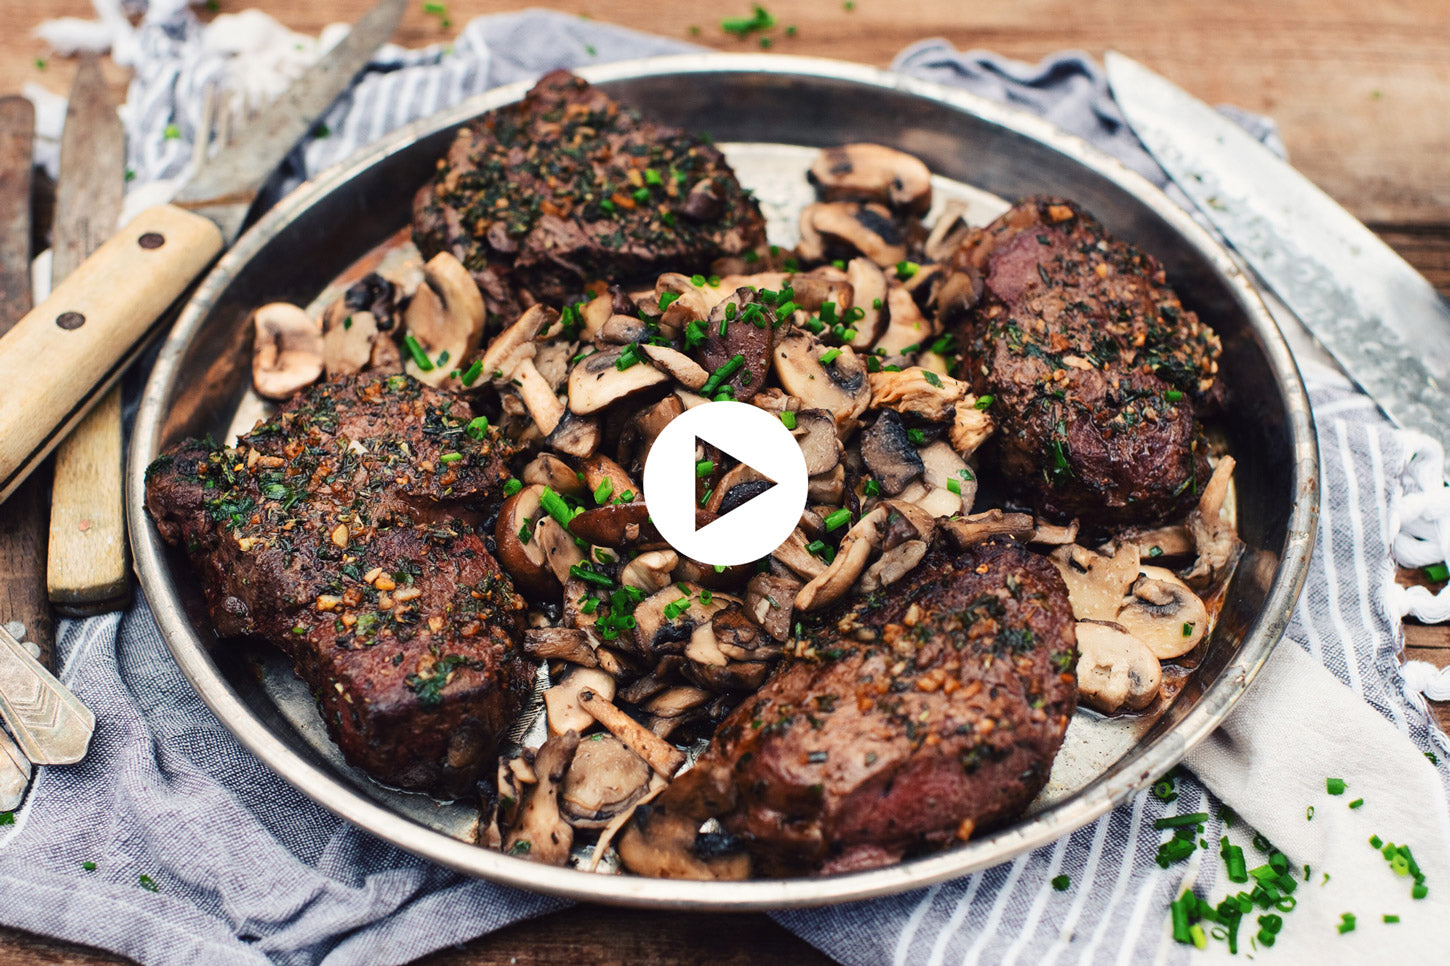 Pan Seared Filet Mignon with Pepper and Whiskey Sauce (VIDEO)